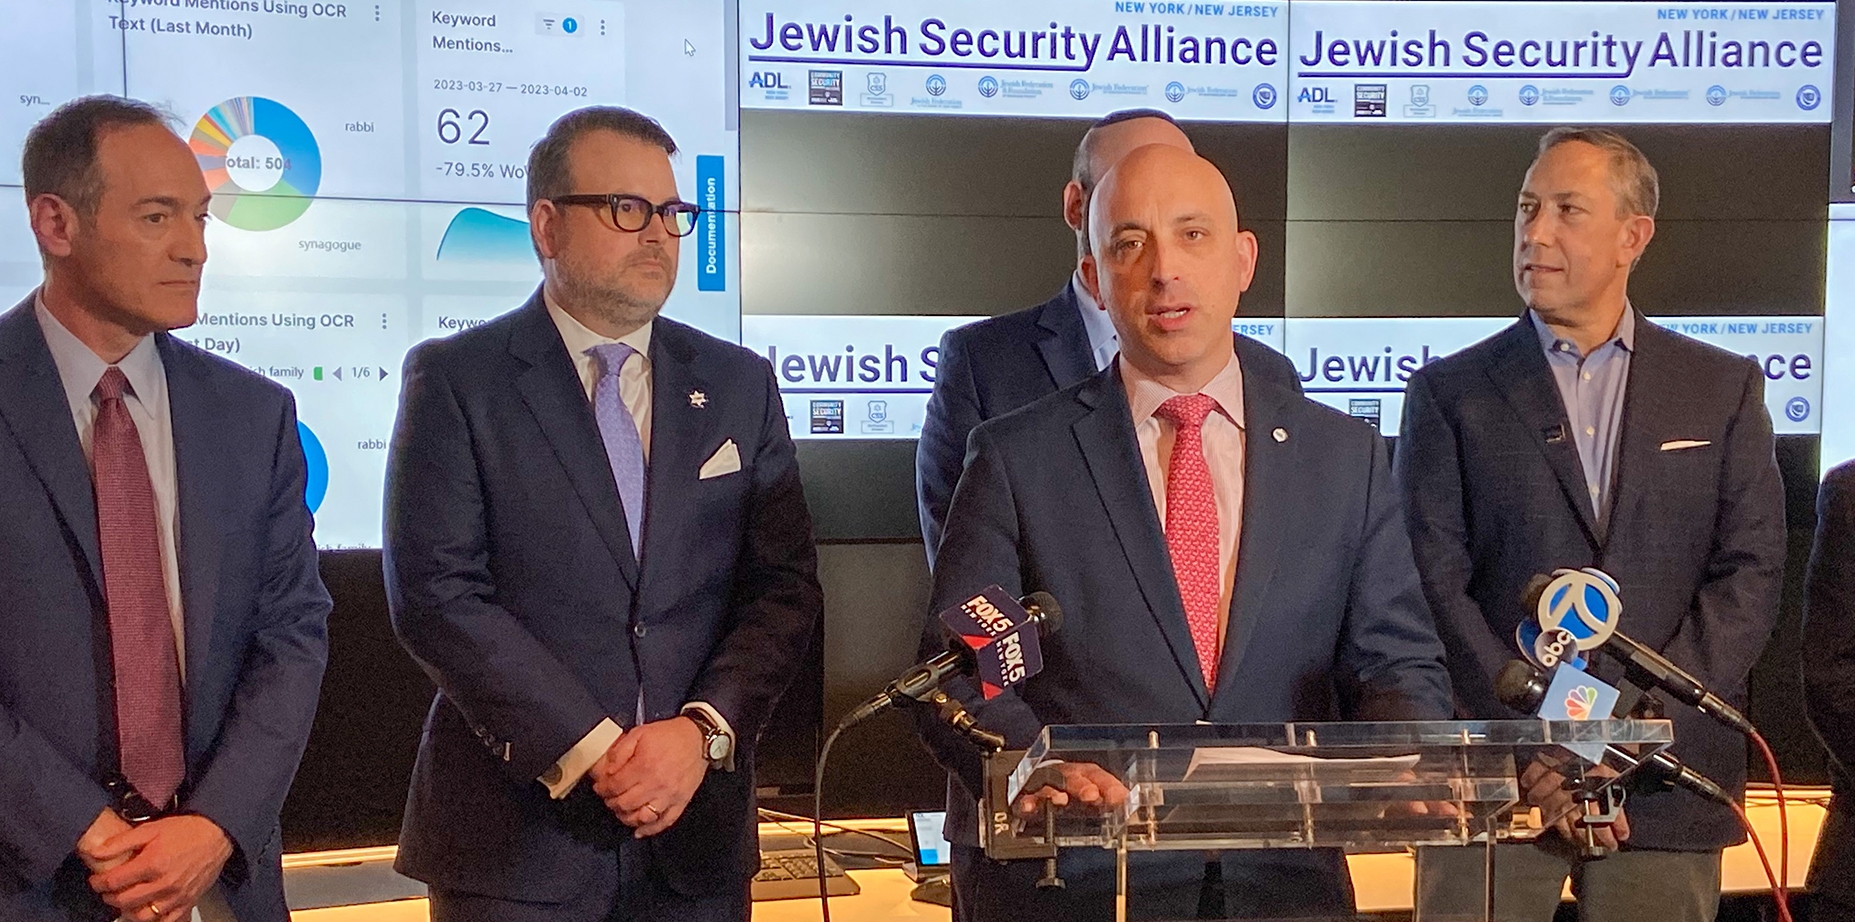 Leading Jewish security organizations form super group called the ‘Jewish Security Alliance’